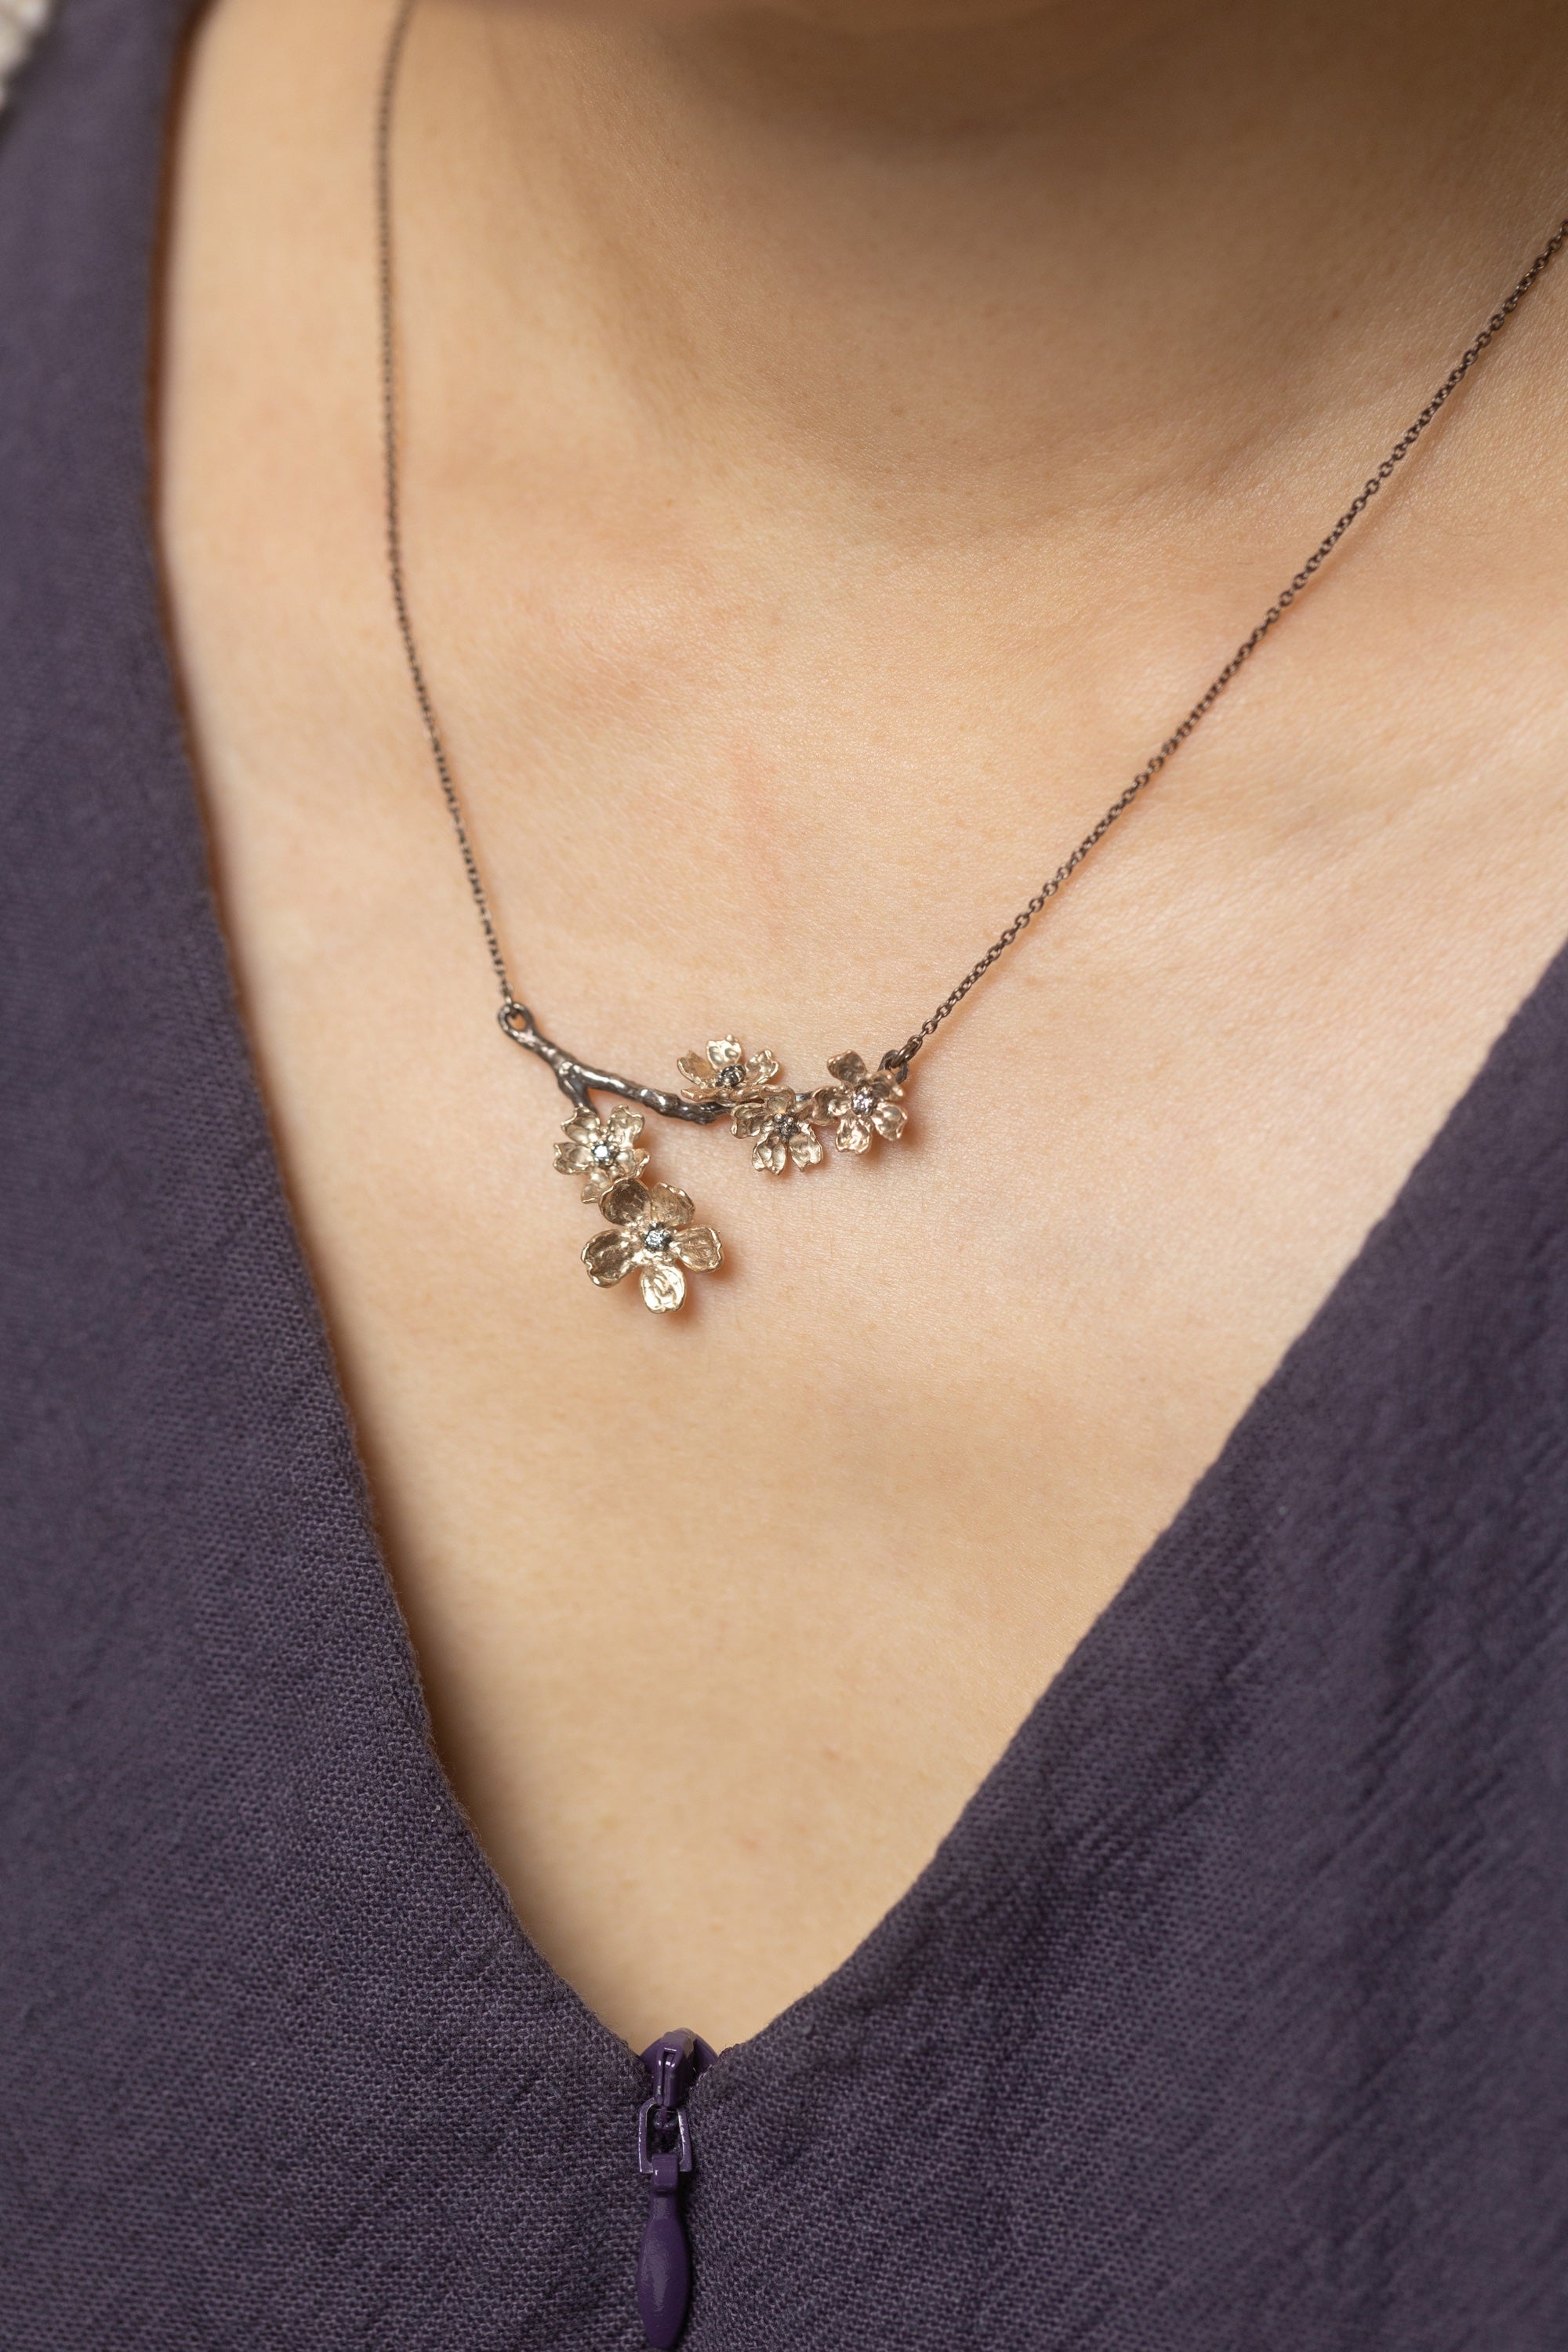 5 Sakura Blossom Necklace with Silver Chain